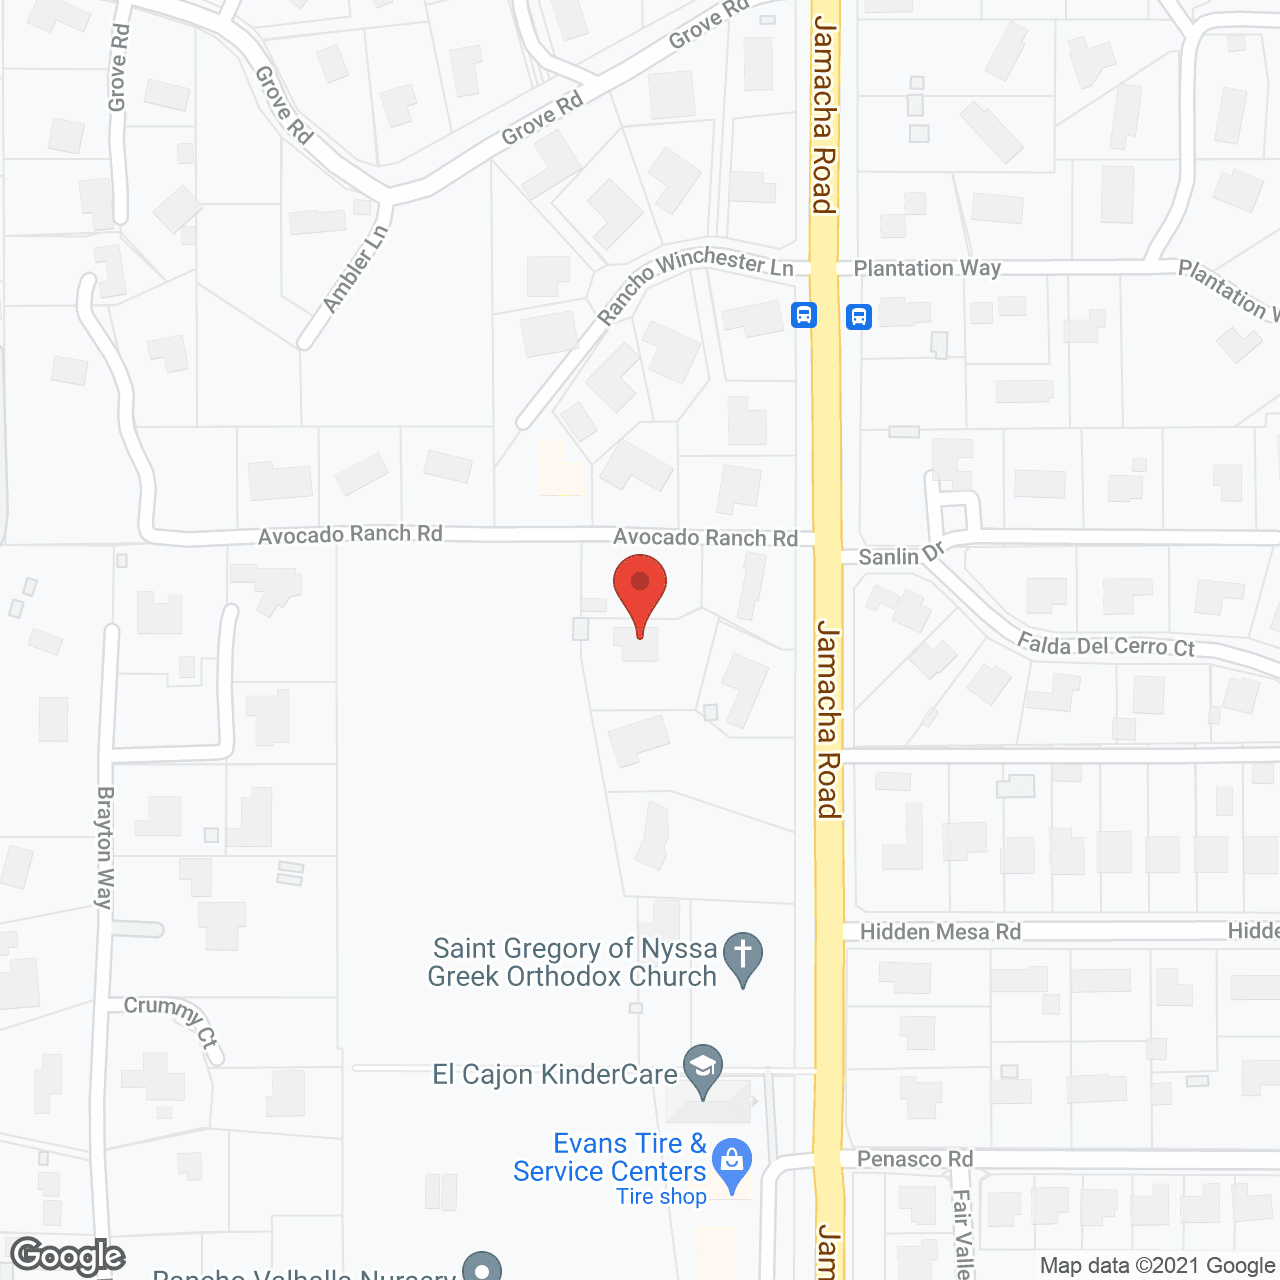 Mountain View Healthcare in google map